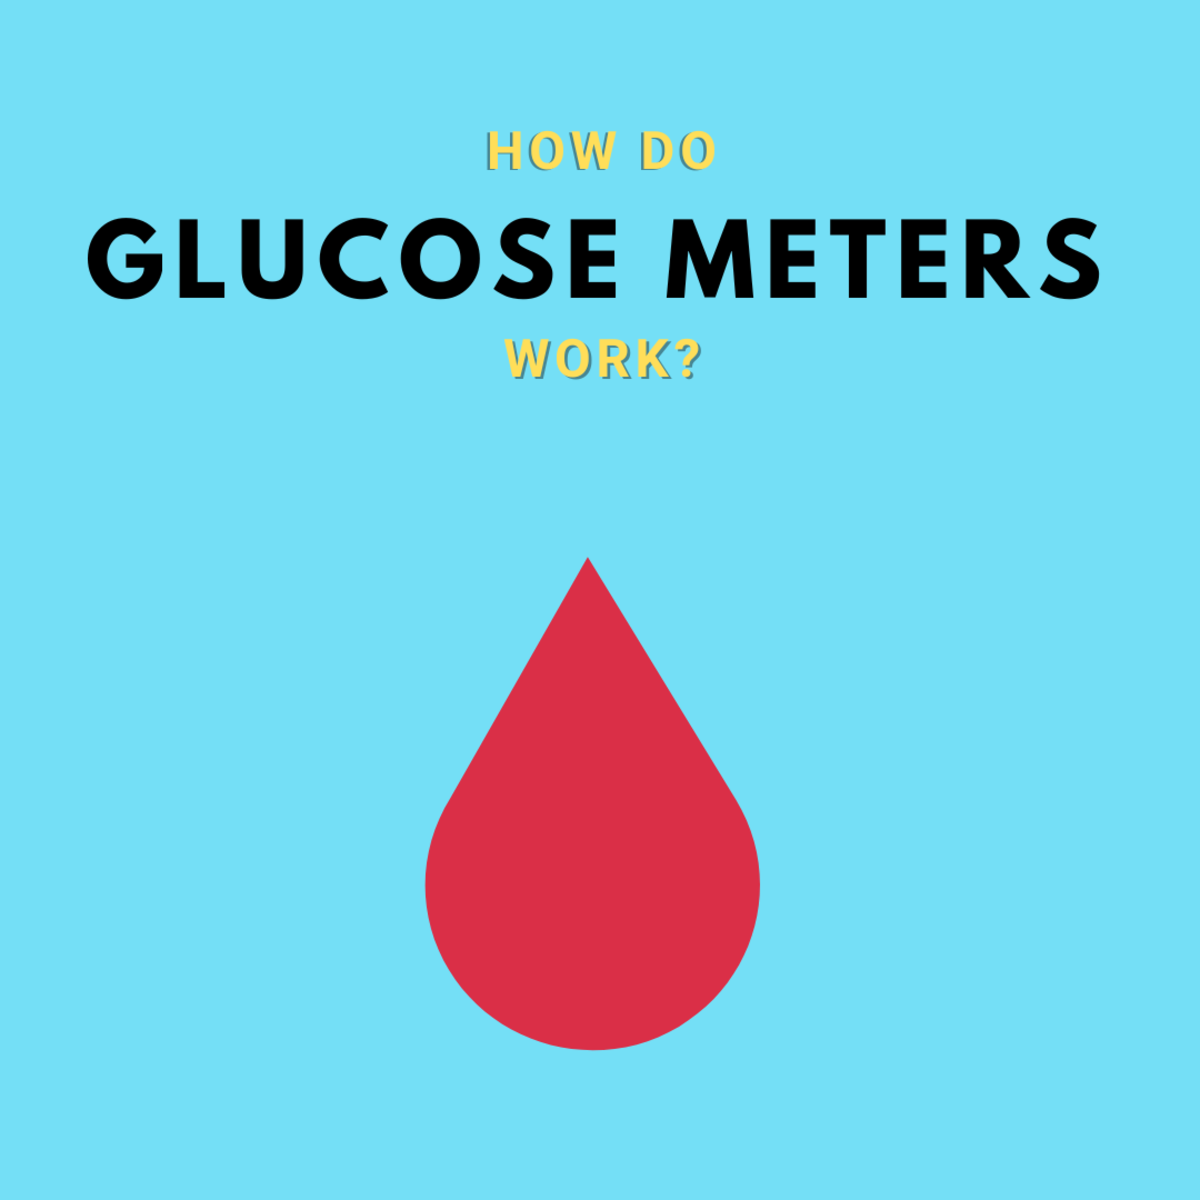 How Does a Glucose Meter Work?